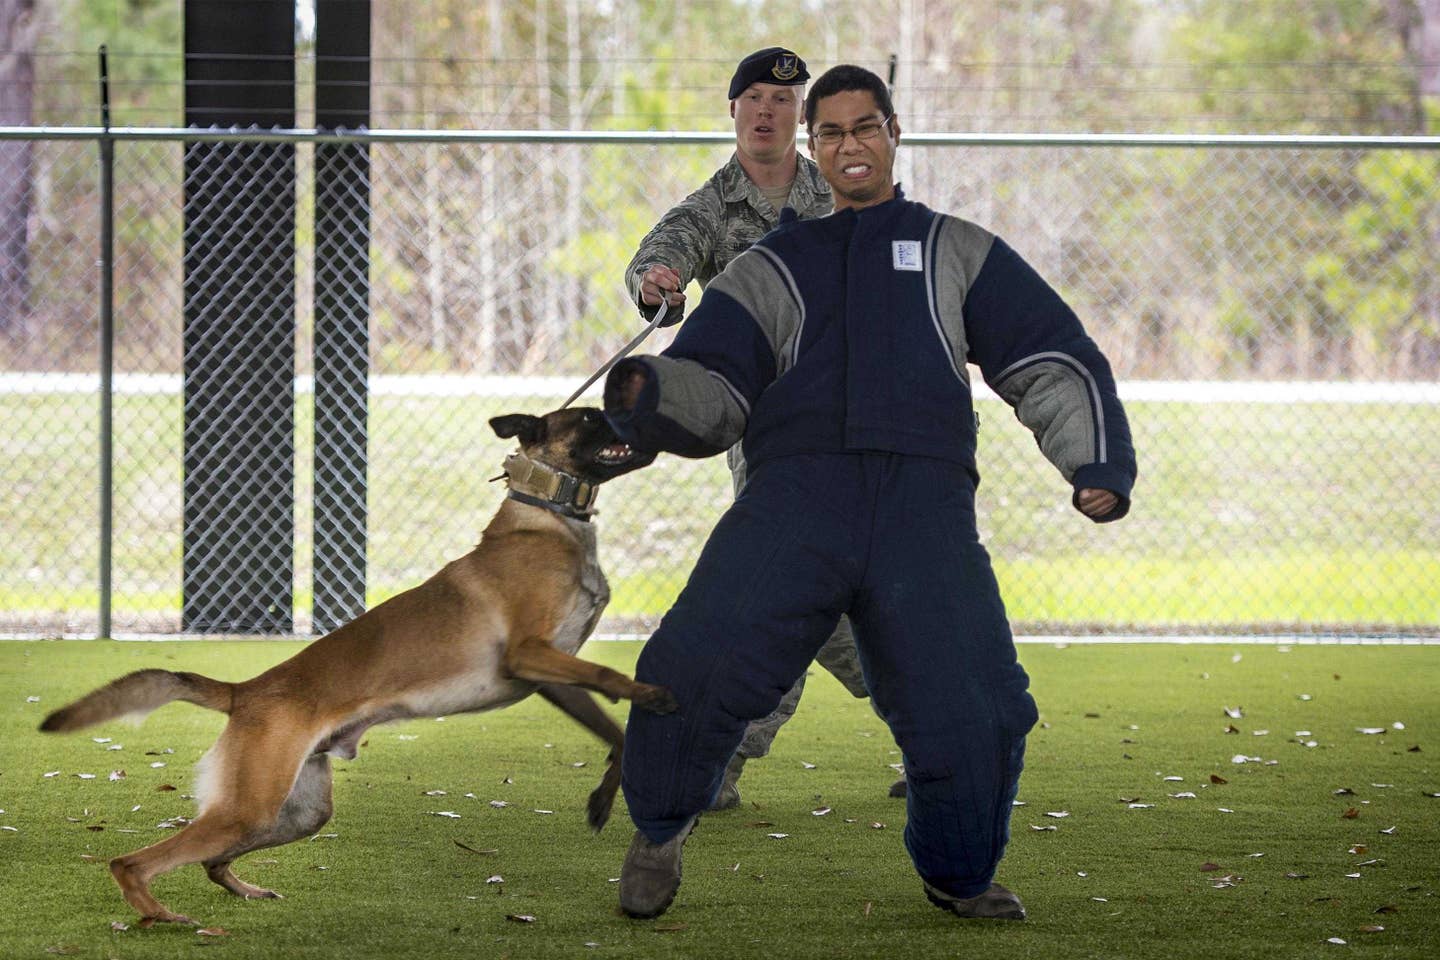 Air Force Senior Airman Anthony Hayes, left, handles Ttoby, a military working dog, as he bites Senior Airman Randle Williams during a demonstration at Moody Air Force Base, Ga., Feb. 2, 2017. Hayes and Williams are military dog handlers assigned to the 23d Security Forces Squadron. Ttoby is a Belgian Malinois and specializes in personnel protection and detecting explosives, trained as a military dog at Joint Base San Antonio-Lackland, Texas. (Air Force photo by Tech. Sgt. Zachary Wolf)